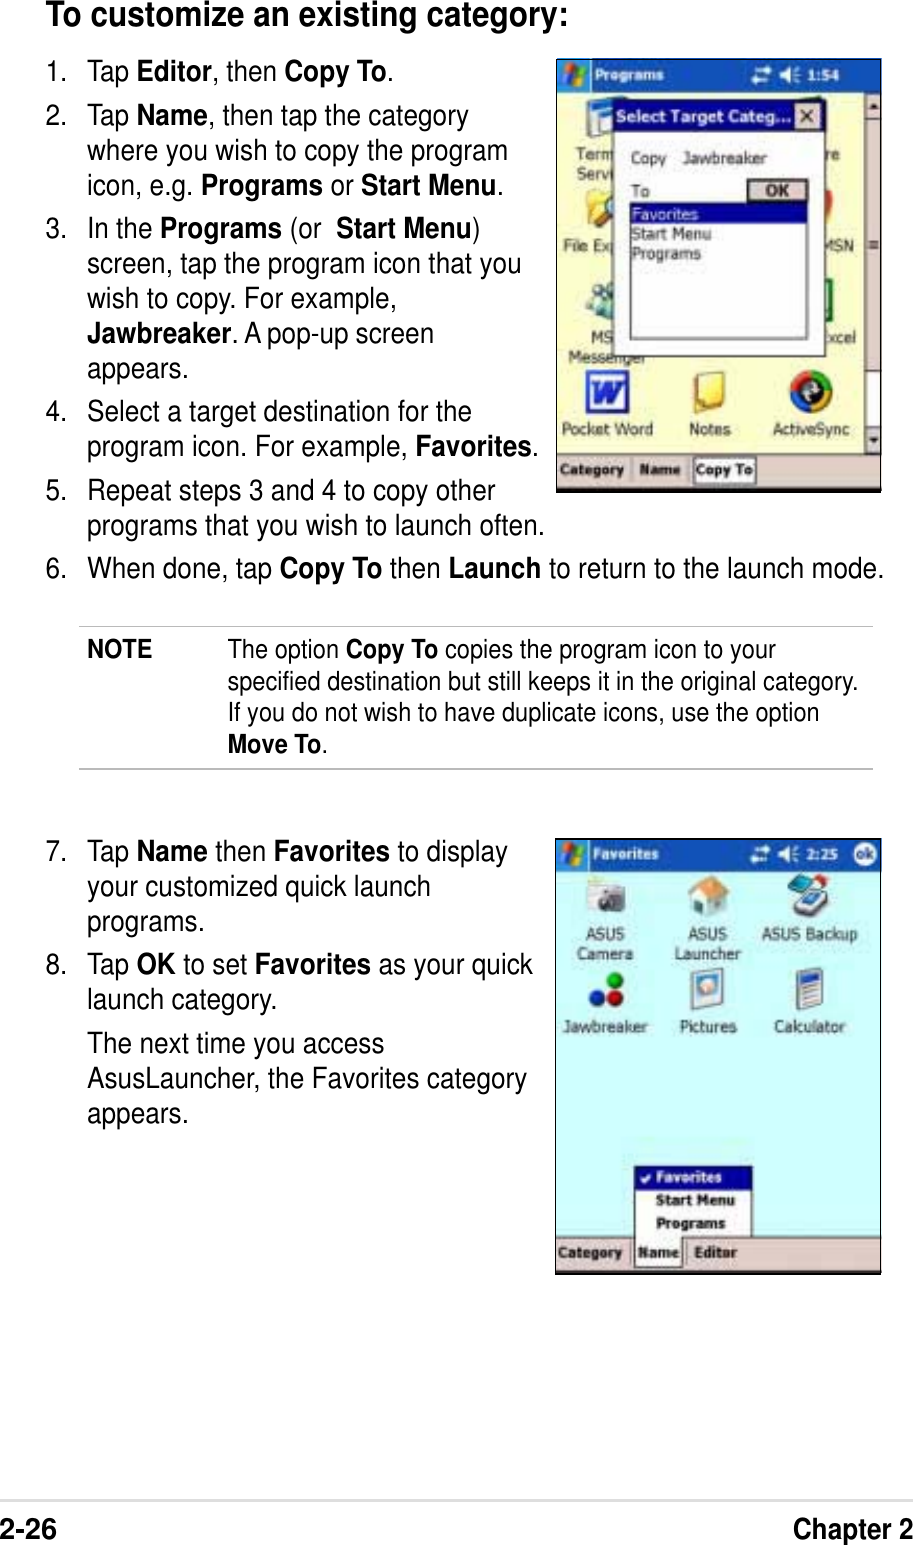 2-26Chapter 2To customize an existing category:1. Tap Editor, then Copy To.2. Tap Name, then tap the categorywhere you wish to copy the programicon, e.g. Programs or Start Menu.3. In the Programs (or Start Menu)screen, tap the program icon that youwish to copy. For example,Jawbreaker. A pop-up screenappears.4. Select a target destination for theprogram icon. For example, Favorites.5. Repeat steps 3 and 4 to copy otherprograms that you wish to launch often.6. When done, tap Copy To then Launch to return to the launch mode.NOTE The option Copy To copies the program icon to yourspecified destination but still keeps it in the original category.If you do not wish to have duplicate icons, use the optionMove To.7. Tap Name then Favorites to displayyour customized quick launchprograms.8. Tap OK to set Favorites as your quicklaunch category.The next time you accessAsusLauncher, the Favorites categoryappears.